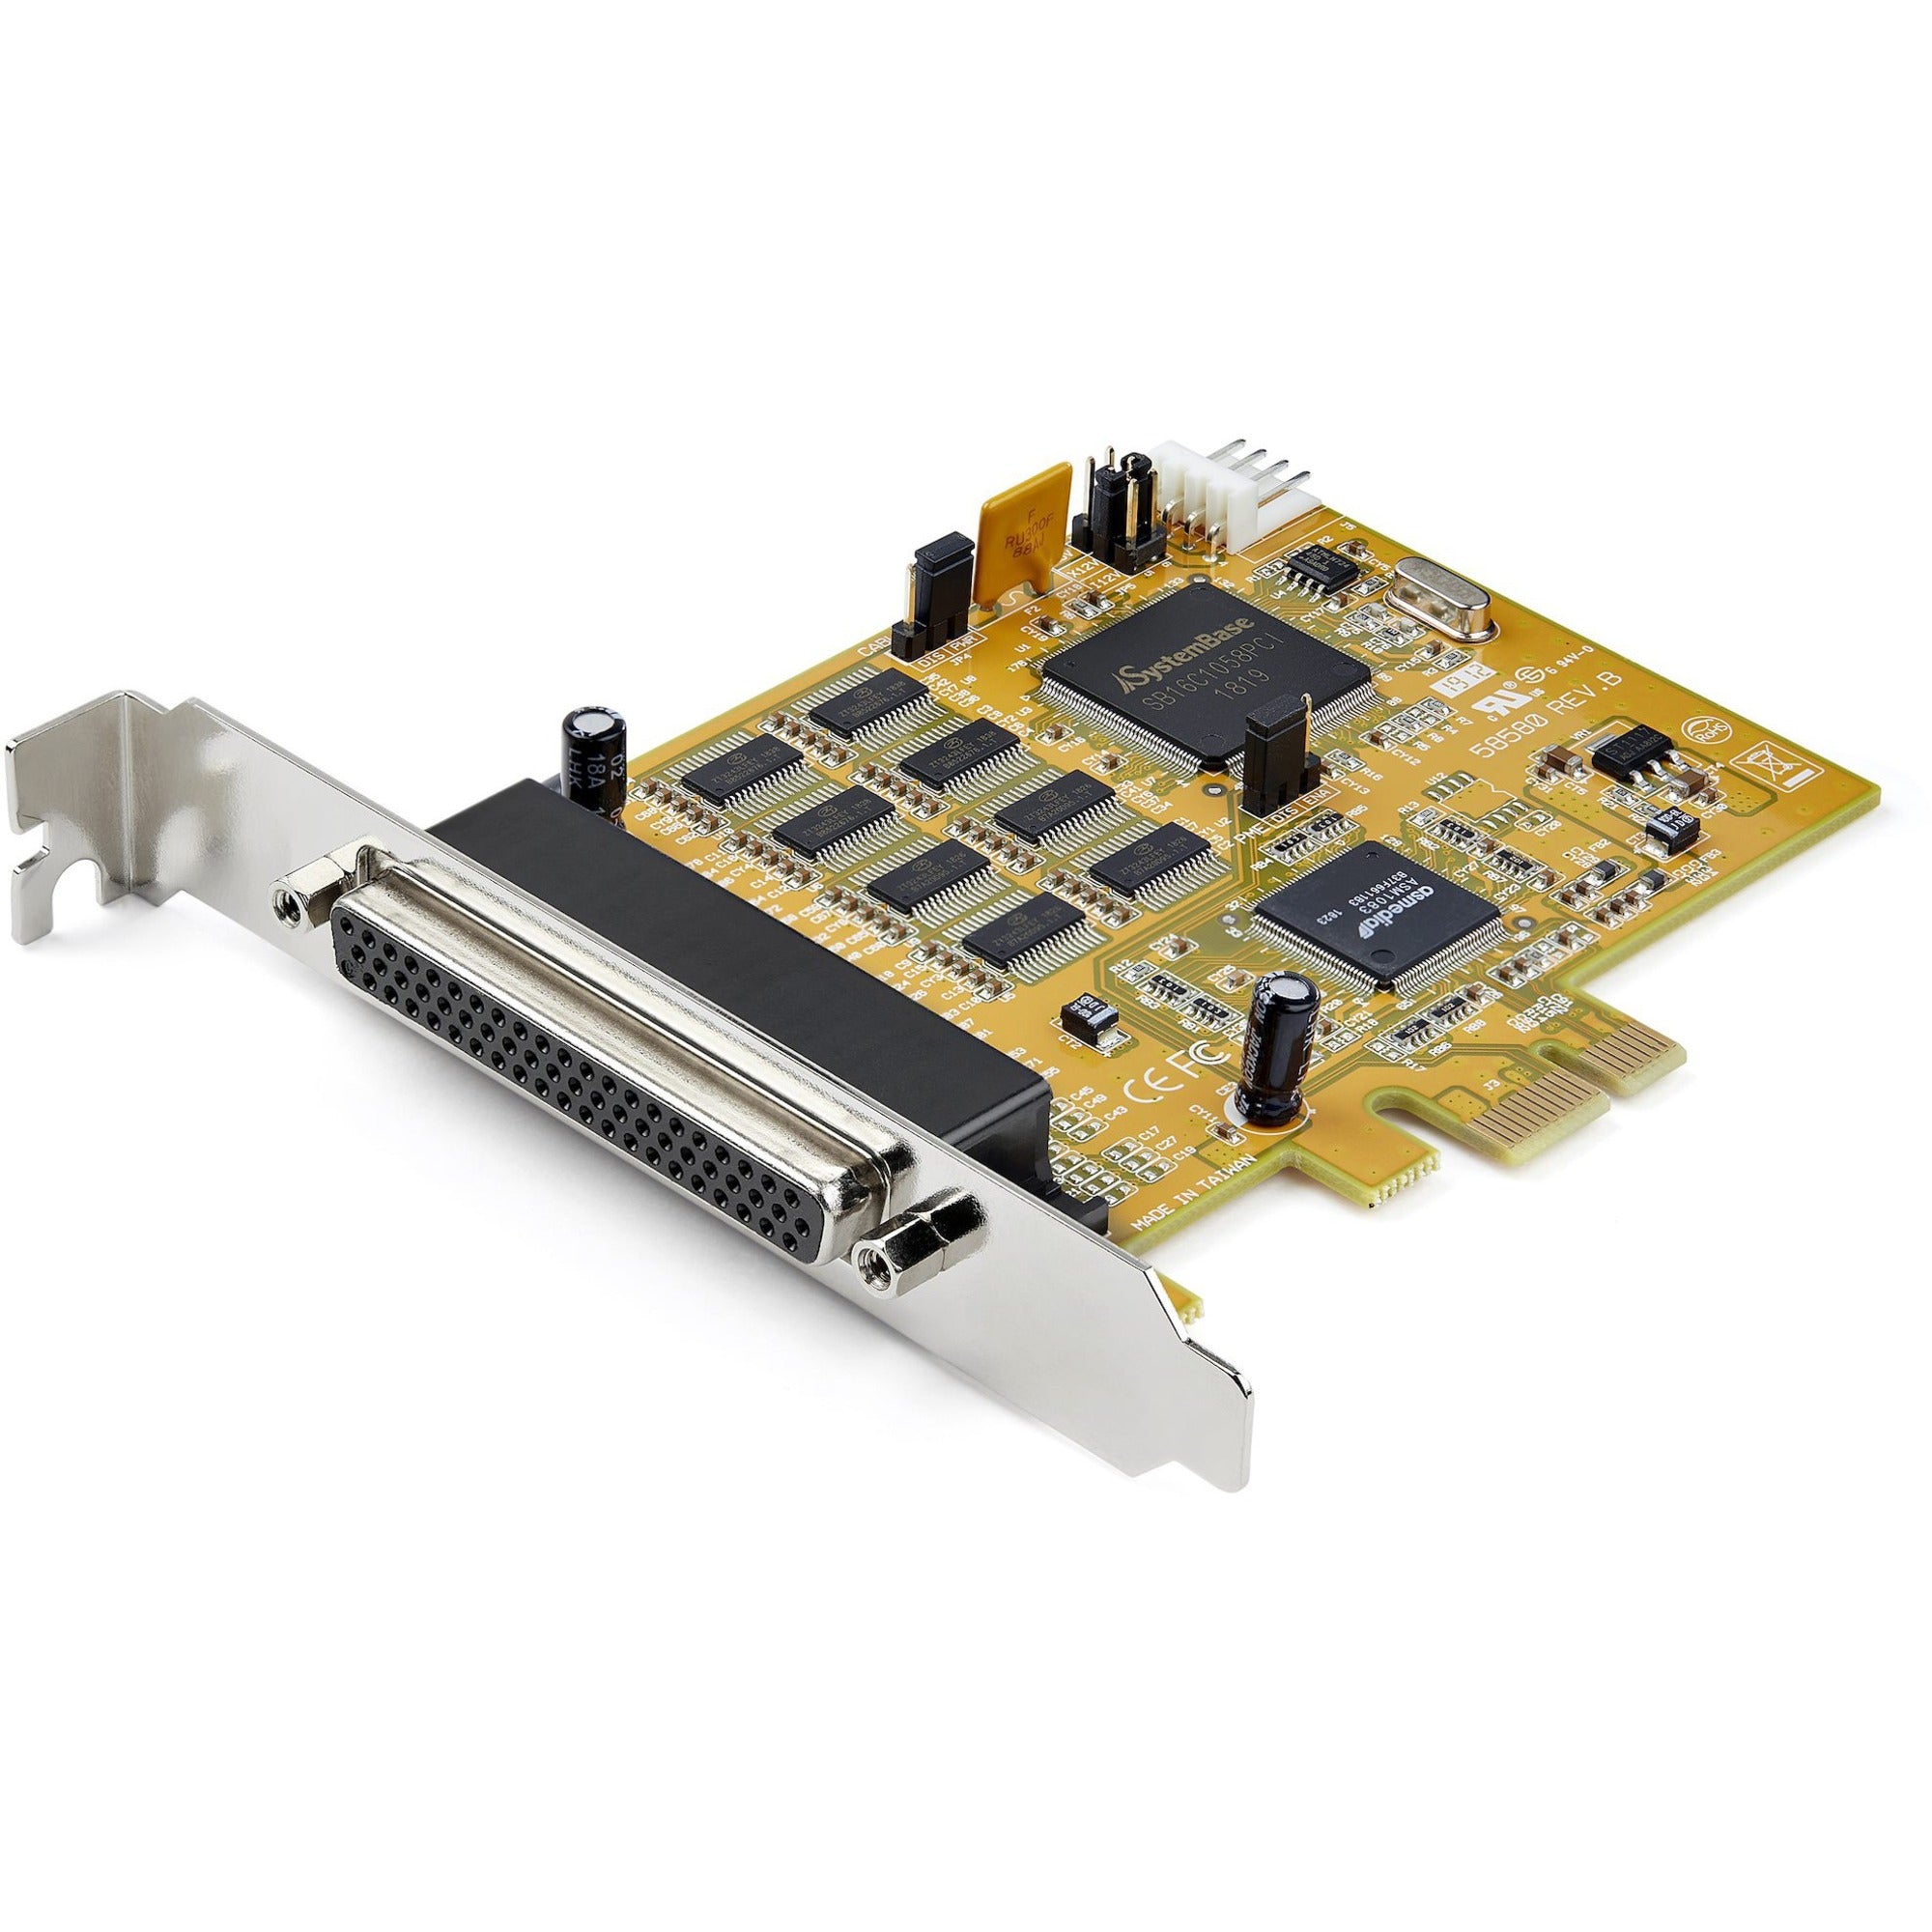 StarTech.com 8-Port PCI Express RS232 Serial Adapter Card - PCIe to Serial DB9 RS232 Controller Card - 16C1050 UART - 15kV ESD - Win/Linux - PEX8S1050